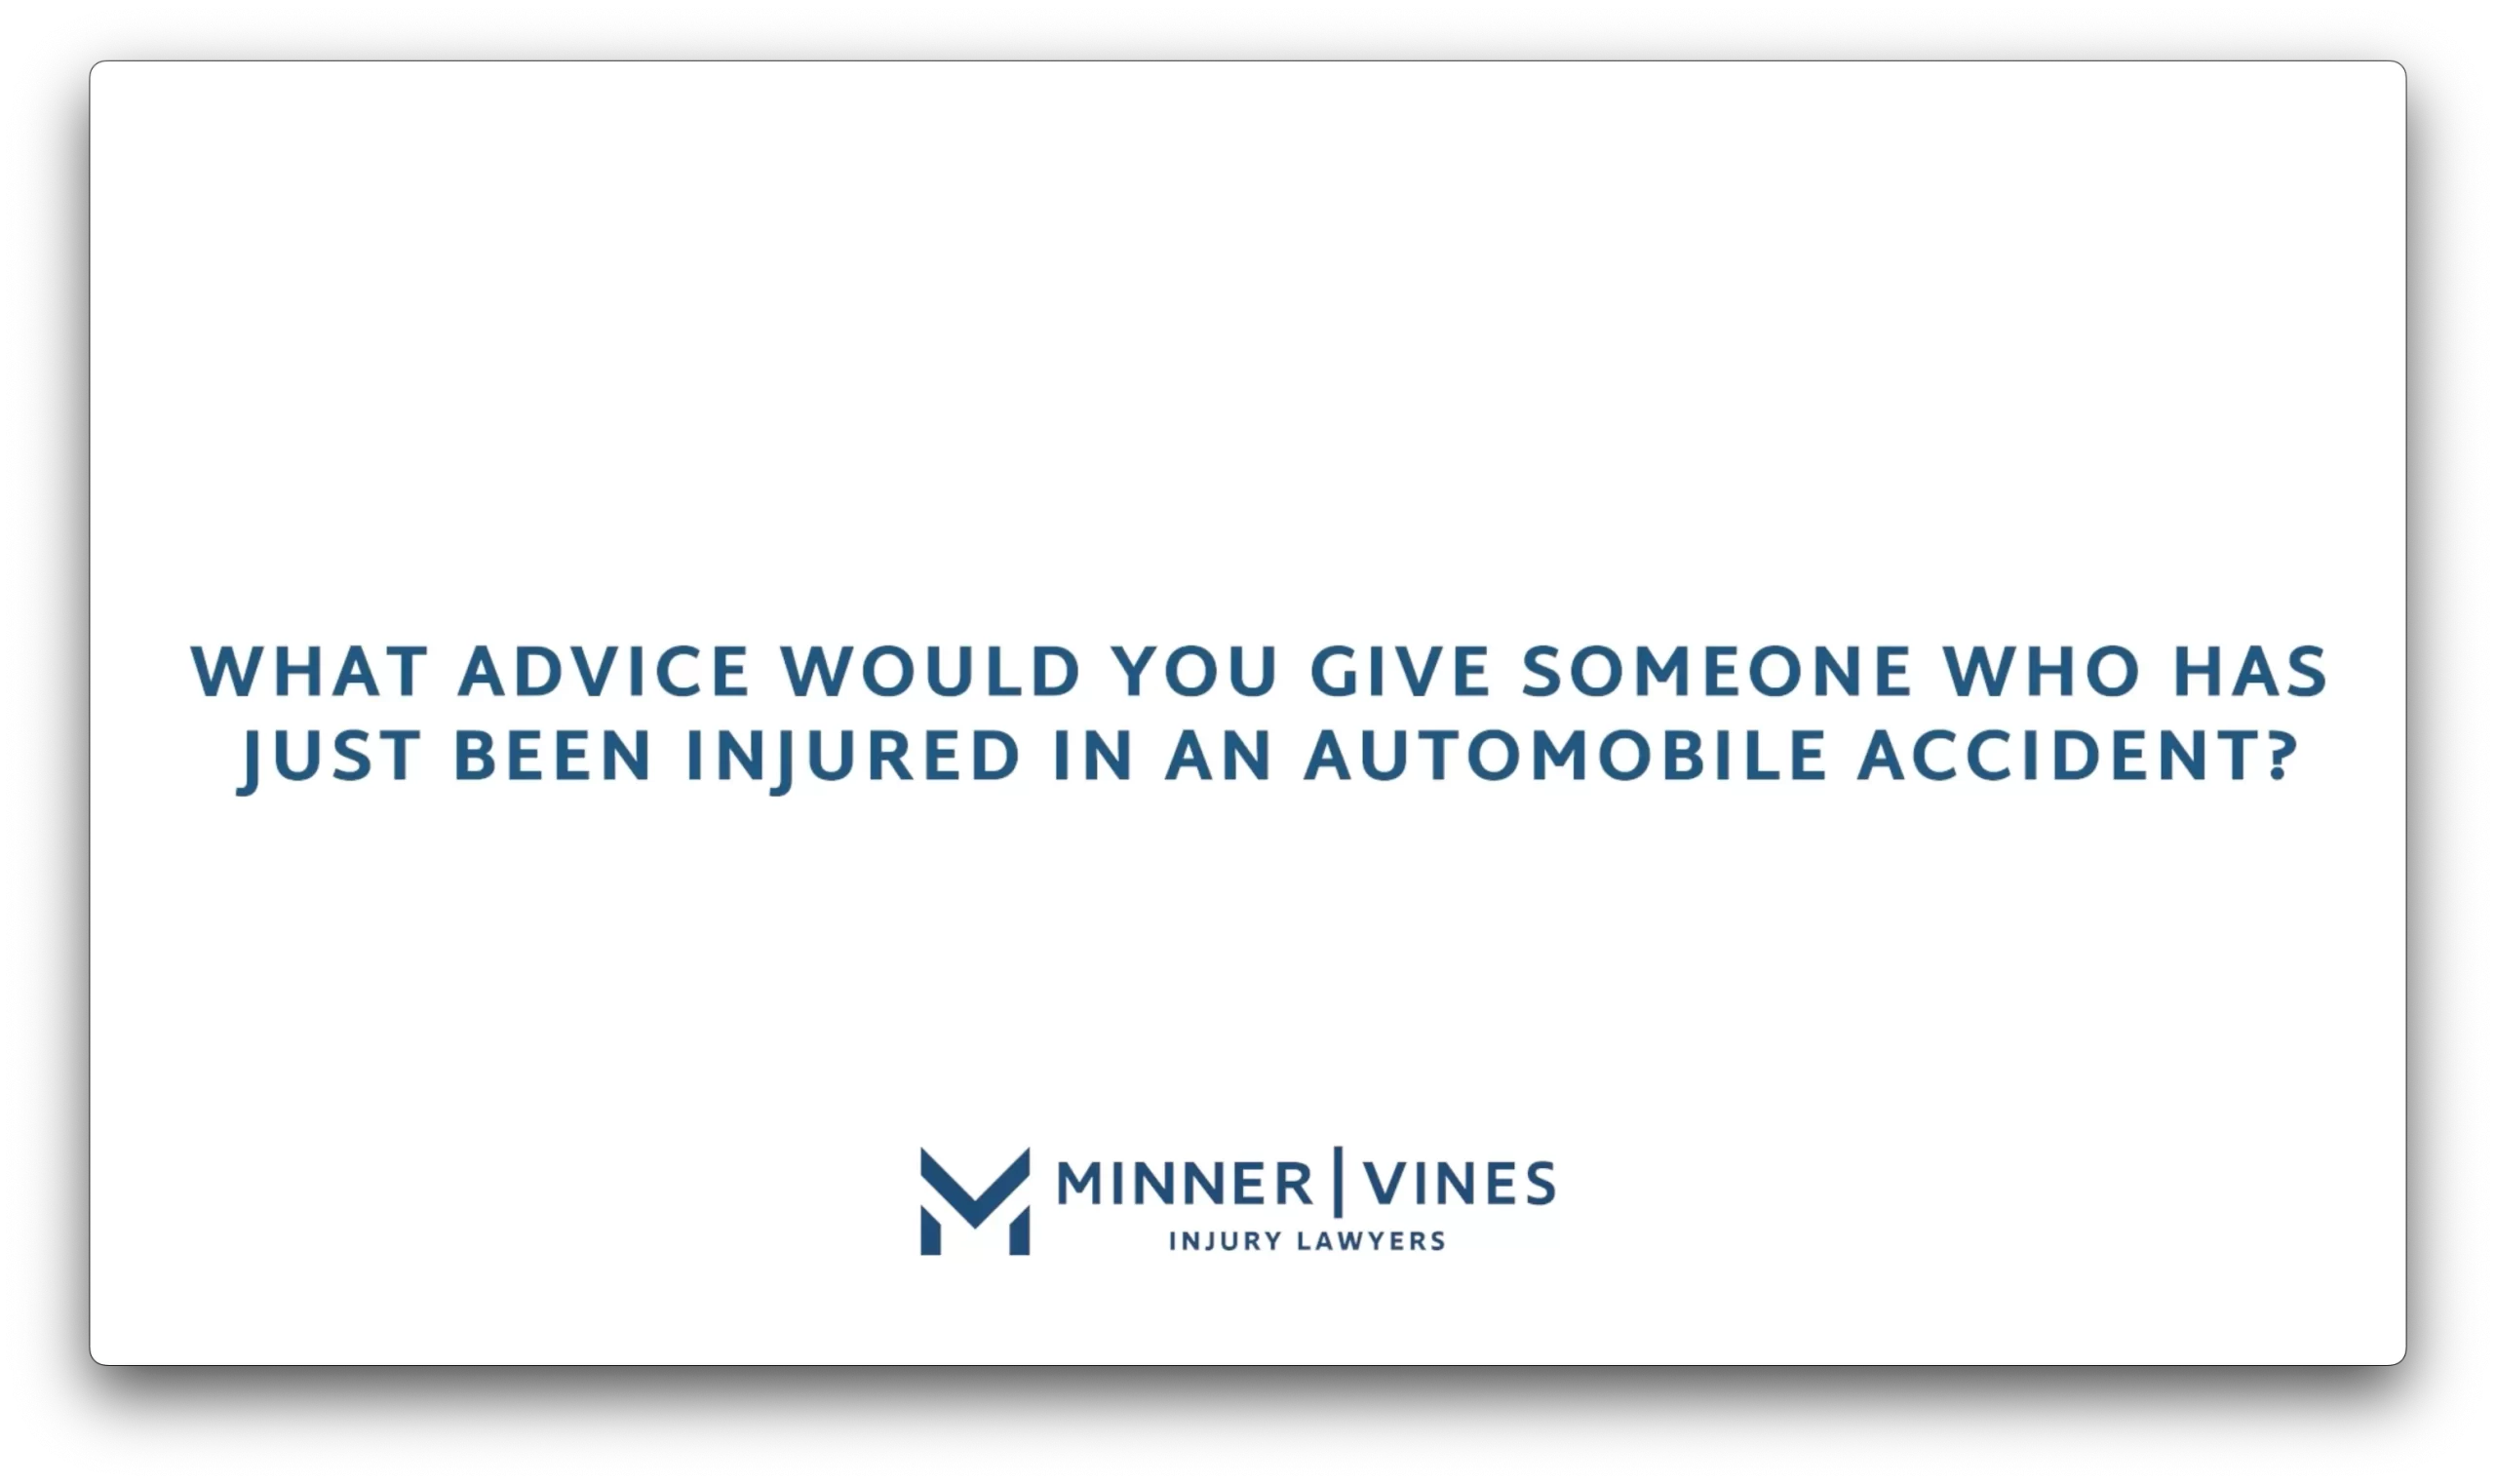 What advice would you give someone who has just been injured in an automobile accident?